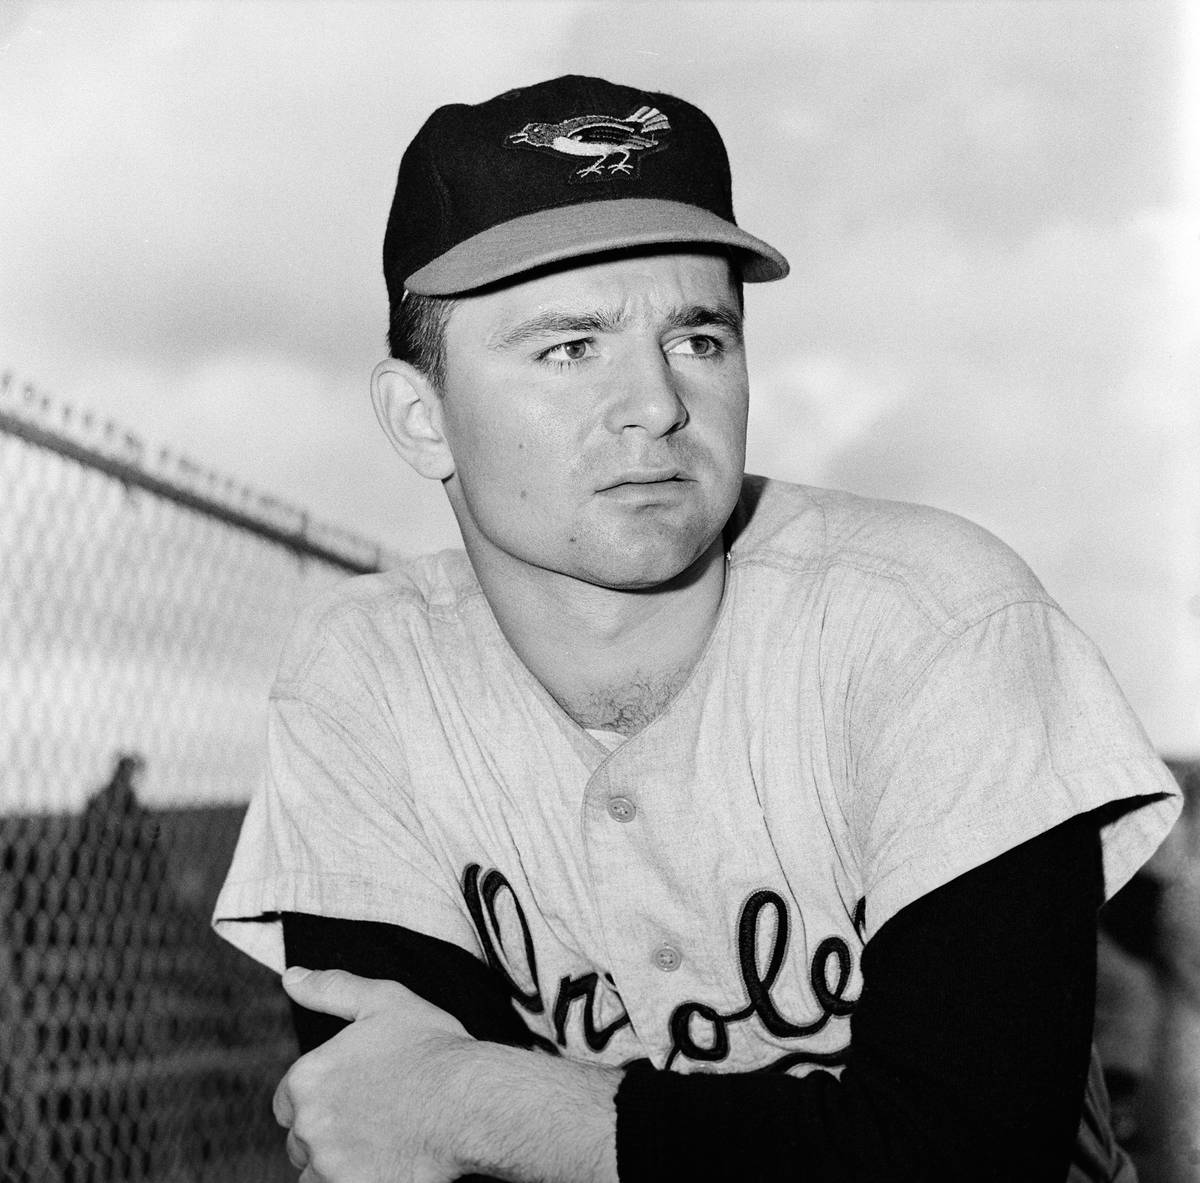 This is a 1959 file photo showing Baltimore Orioles minor league pitcher Steve Dalkowski posed ...